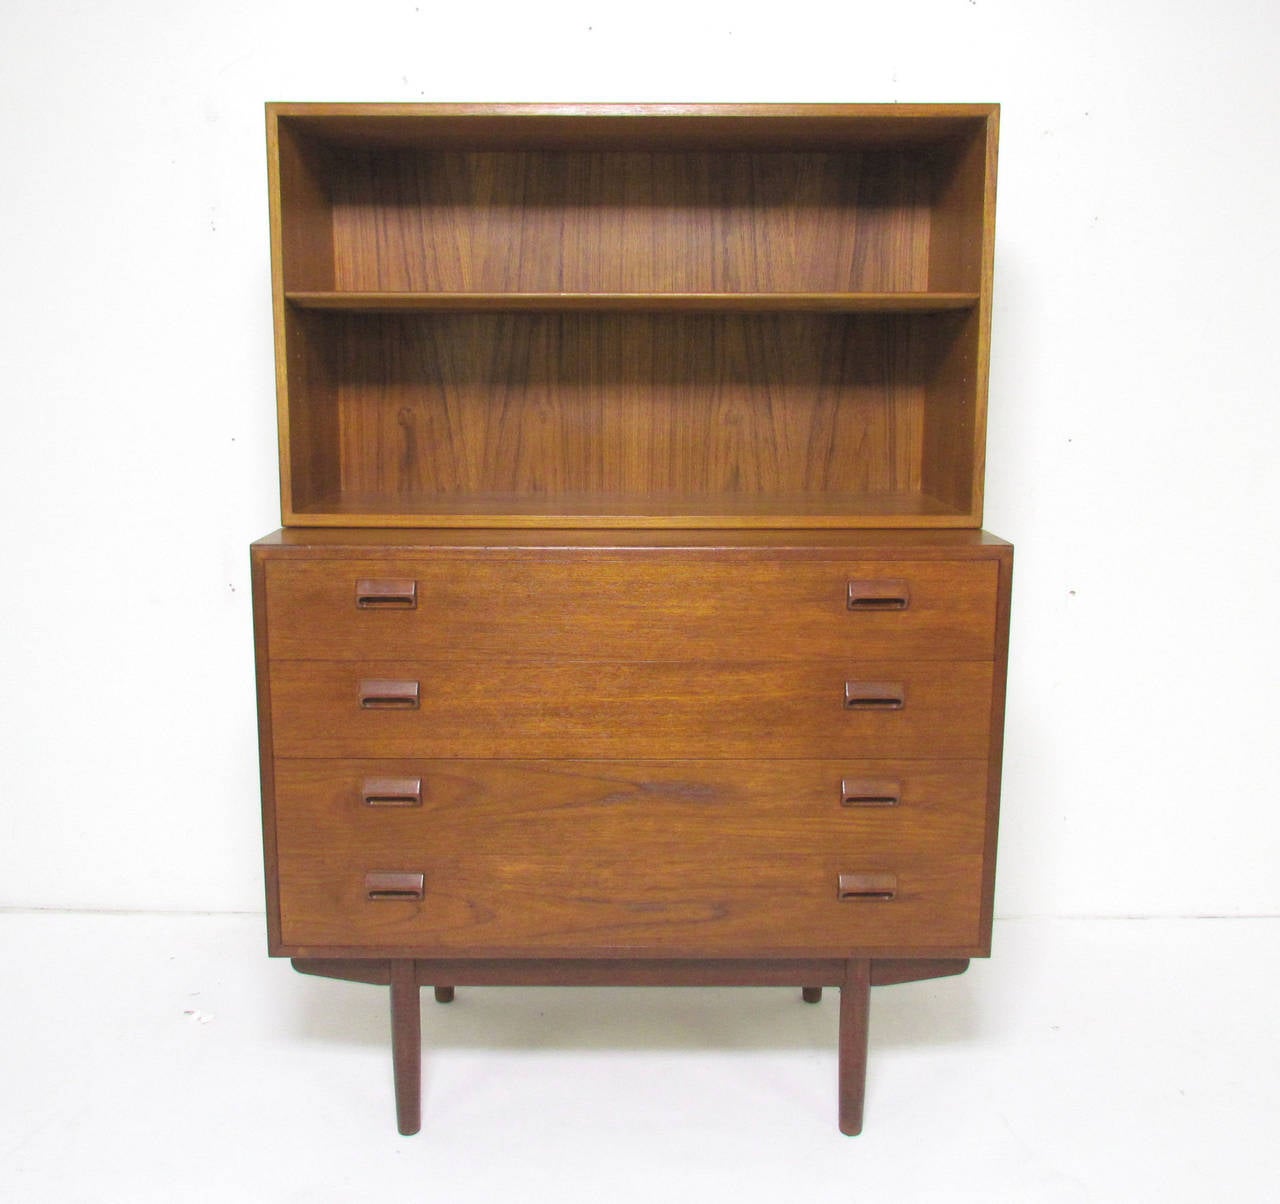 Teak four-drawer dresser with top open shelving unit by Børge Mogensen for Søborg Møbelfabrik, Denmark, circa 1950s. The chest can be used without the shelving unit if desired, and or the shelving unit can be wall-mounted above.